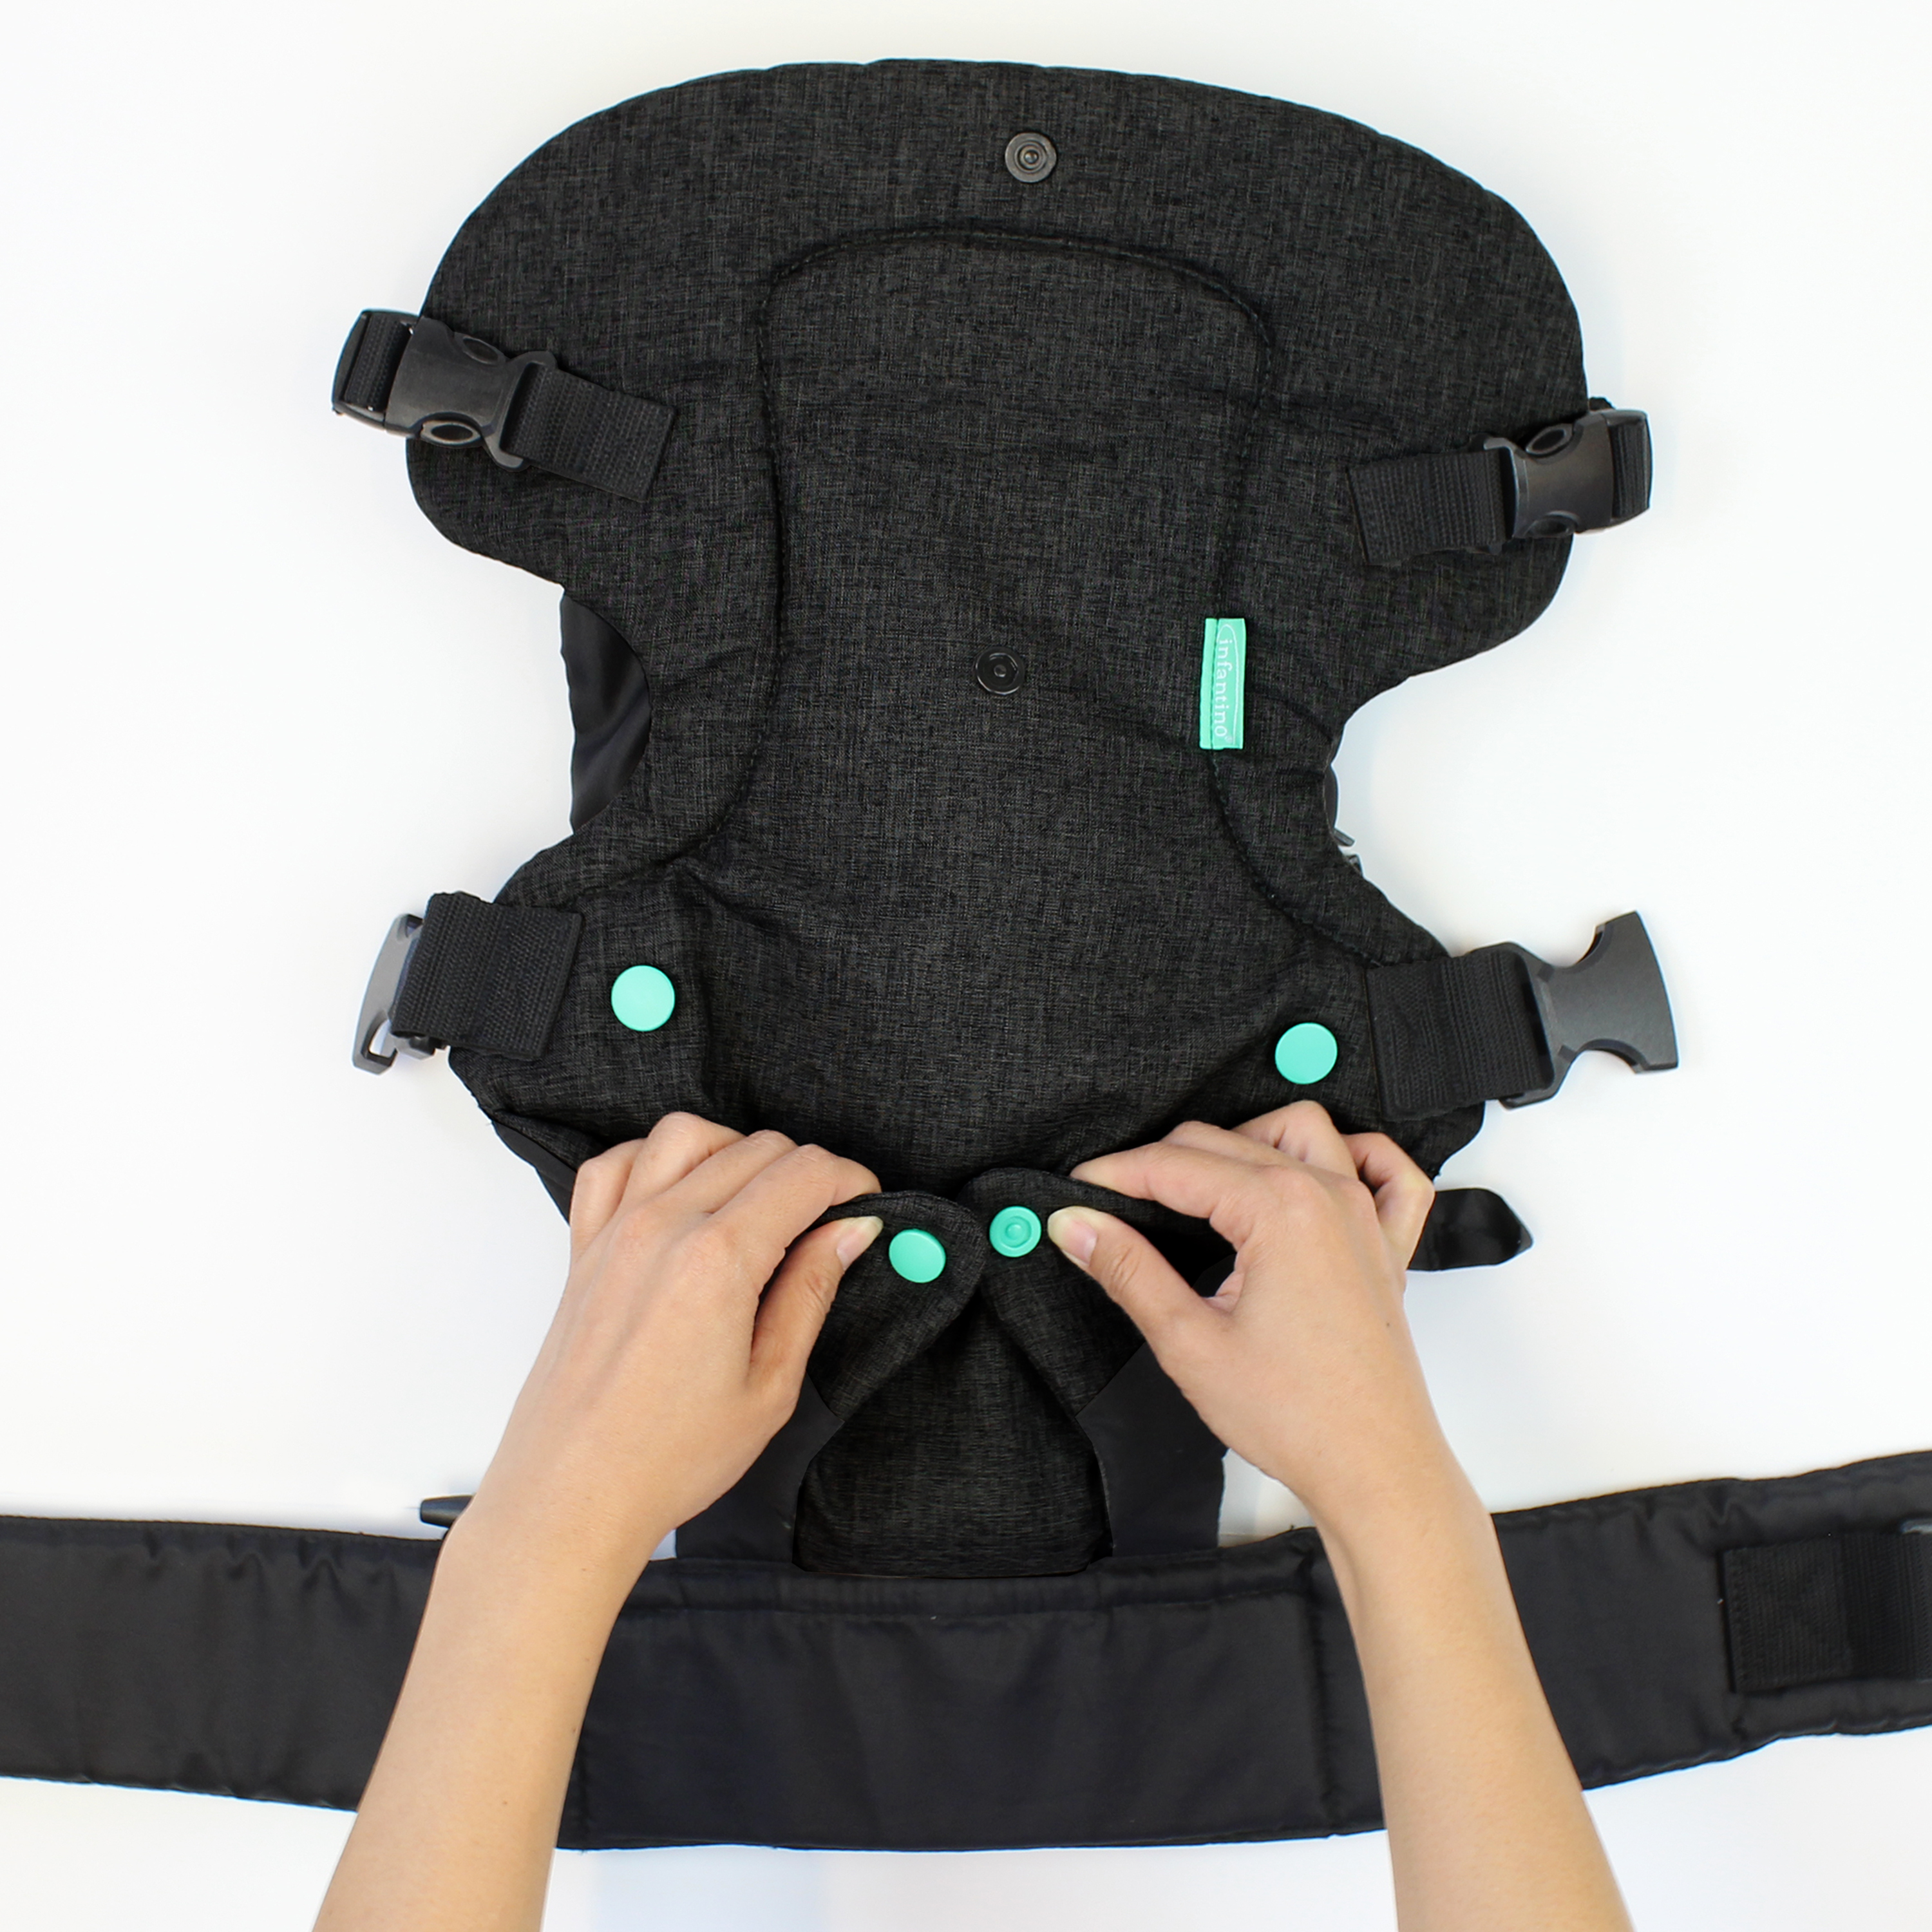 Infantino Flip 4-in-1 Convertible Baby Carrier, 4-Position, 8-32lb, Black - image 4 of 12